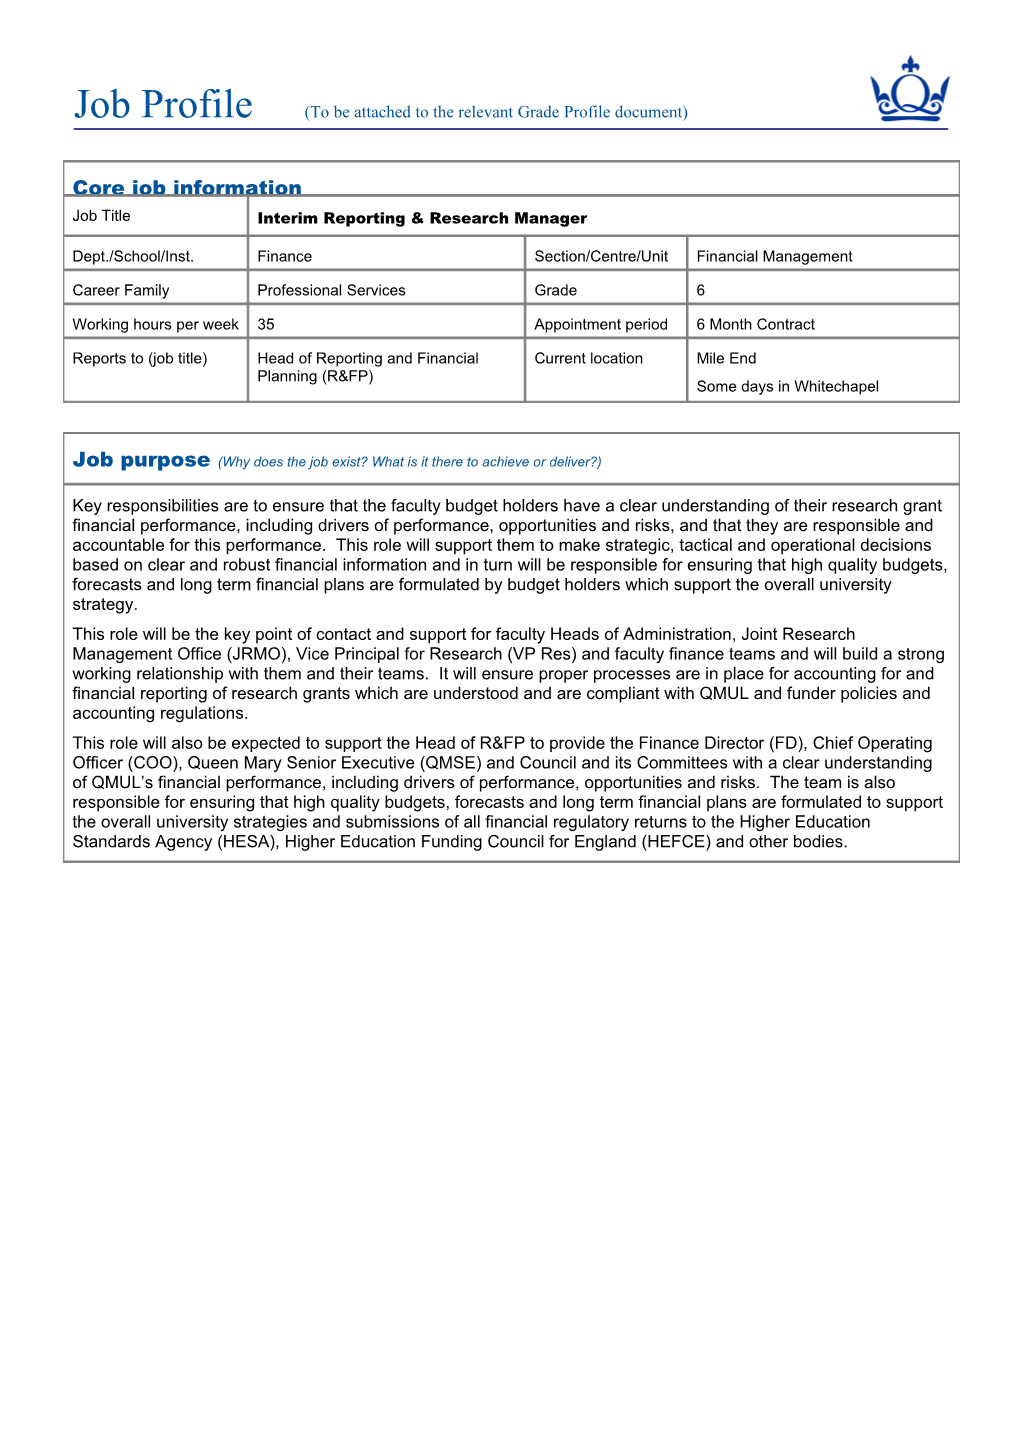 Job Profile (To Be Attached to the Relevant Grade Profile Document)